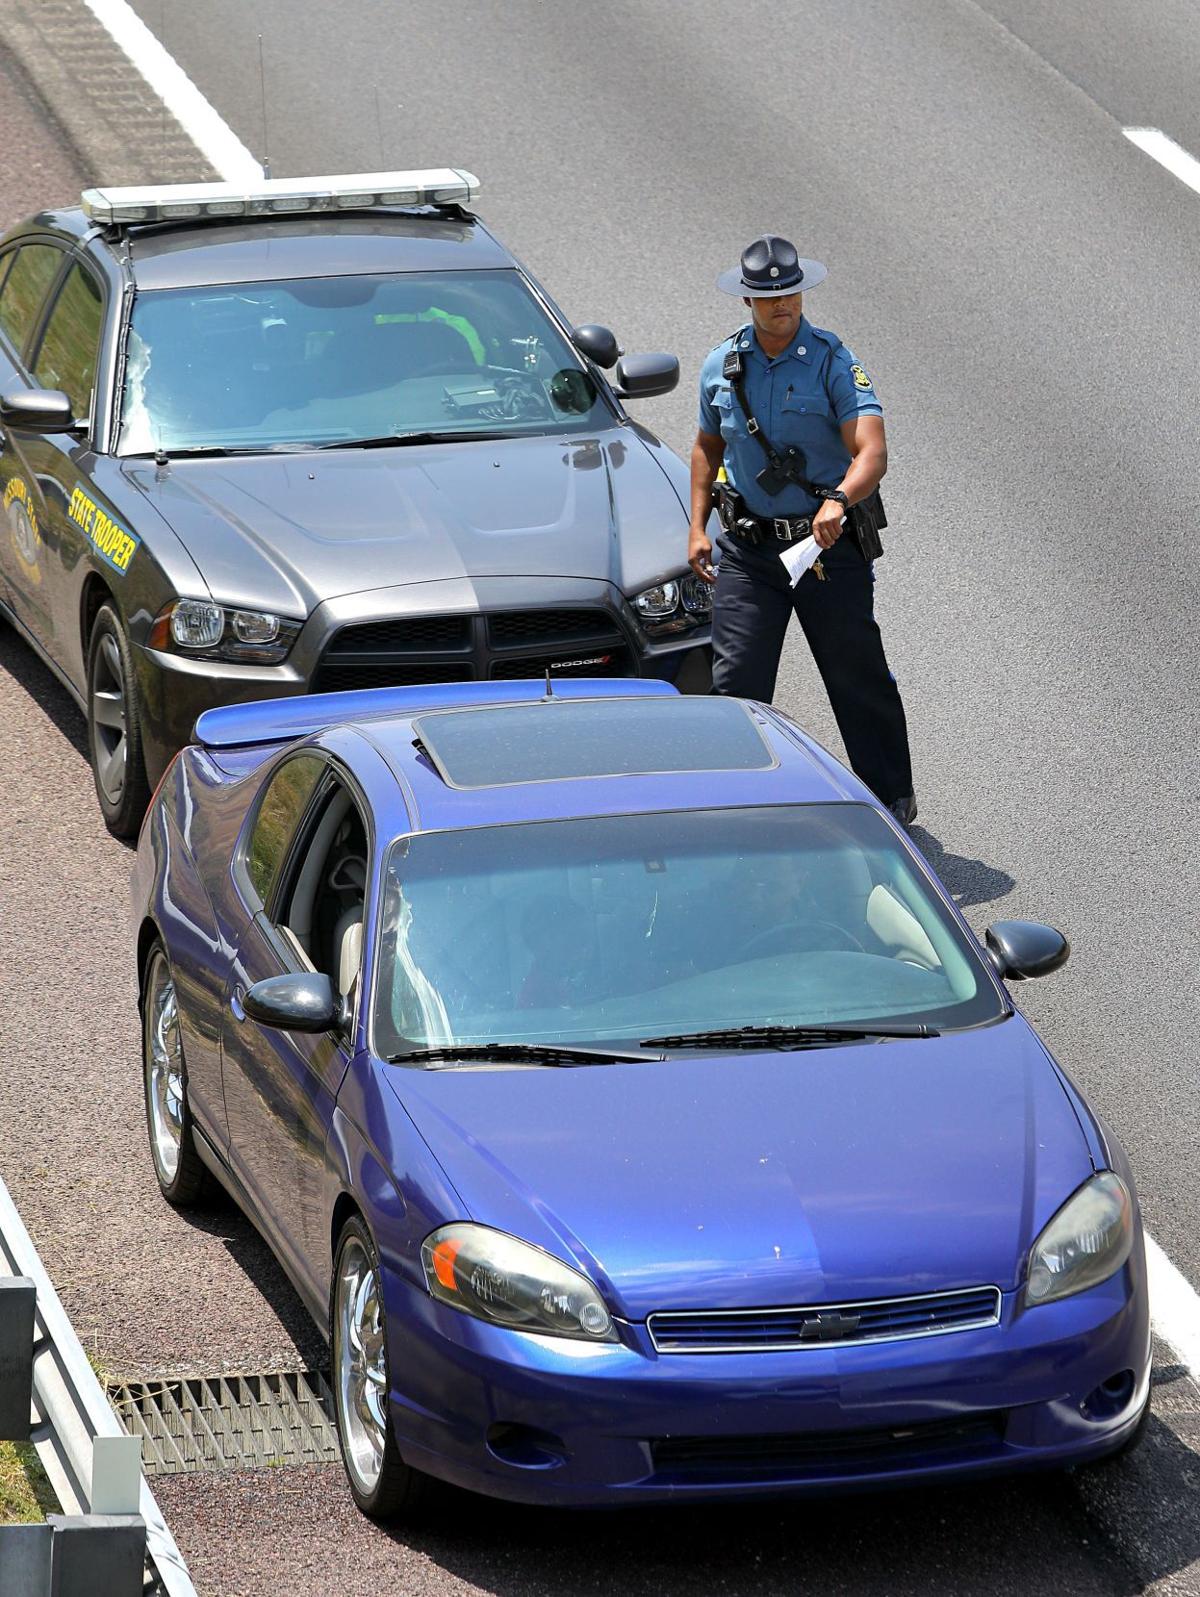 Missouri Highway Patrol continuing to police St. Louis interstates as pilot program ends | Law ...